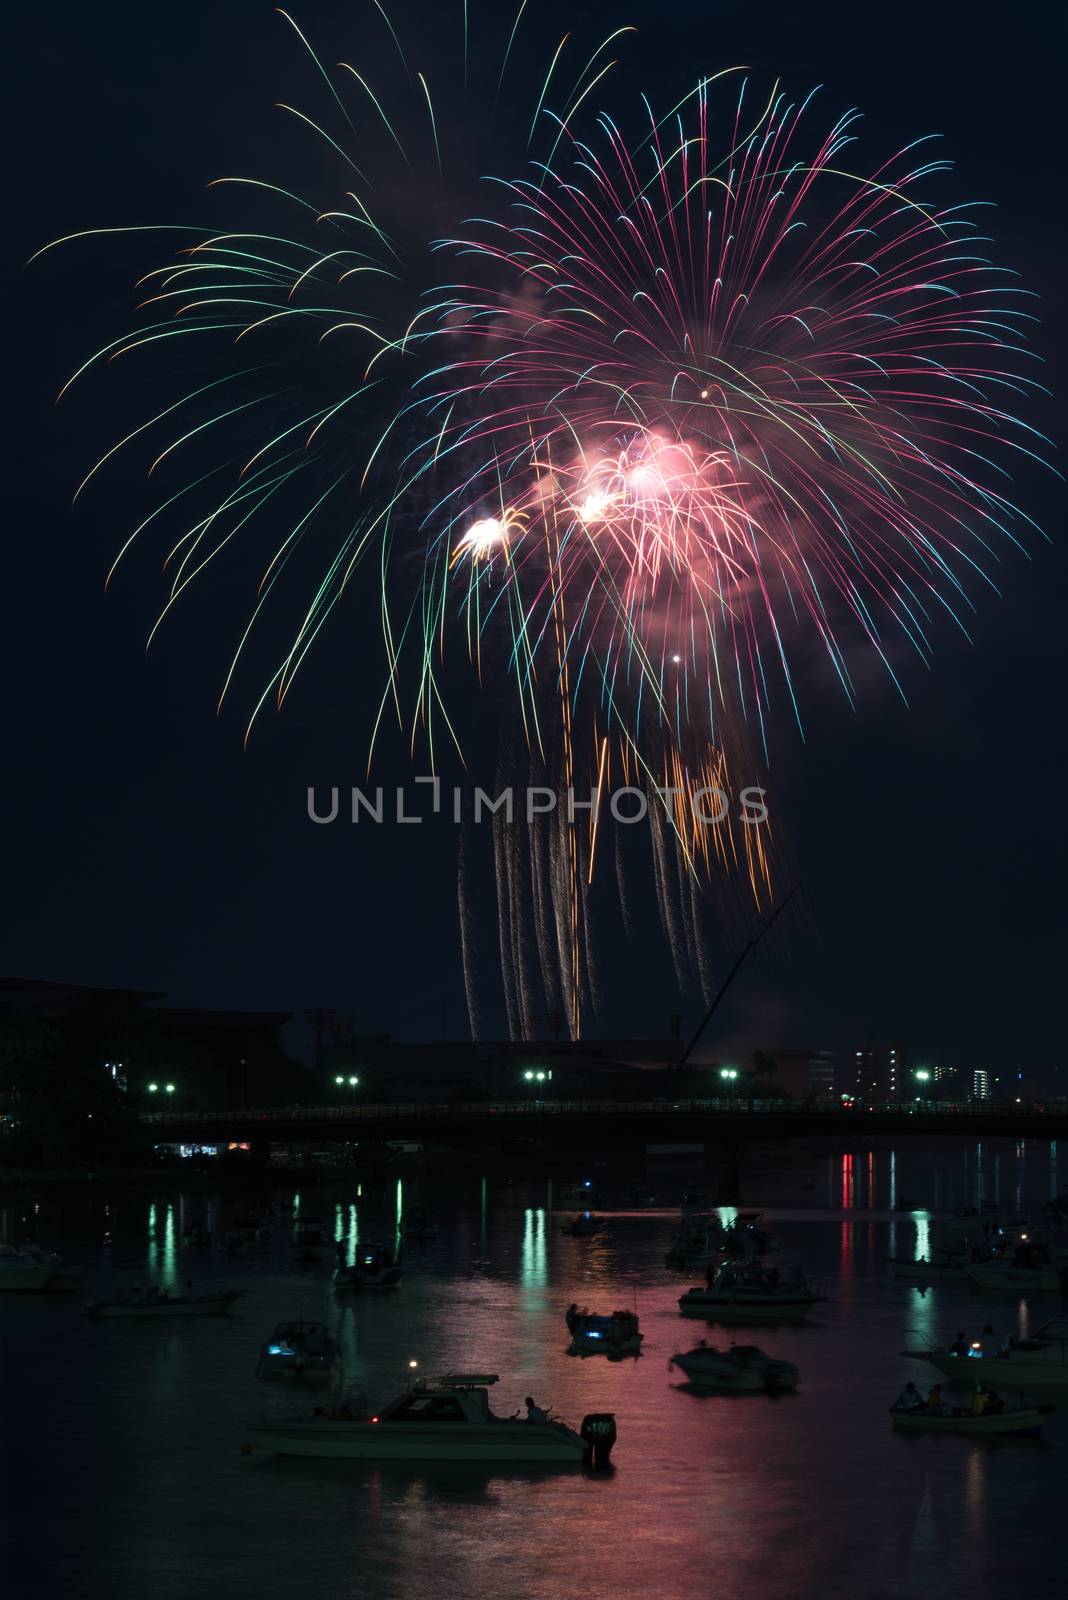 Fireworks over River by justtscott